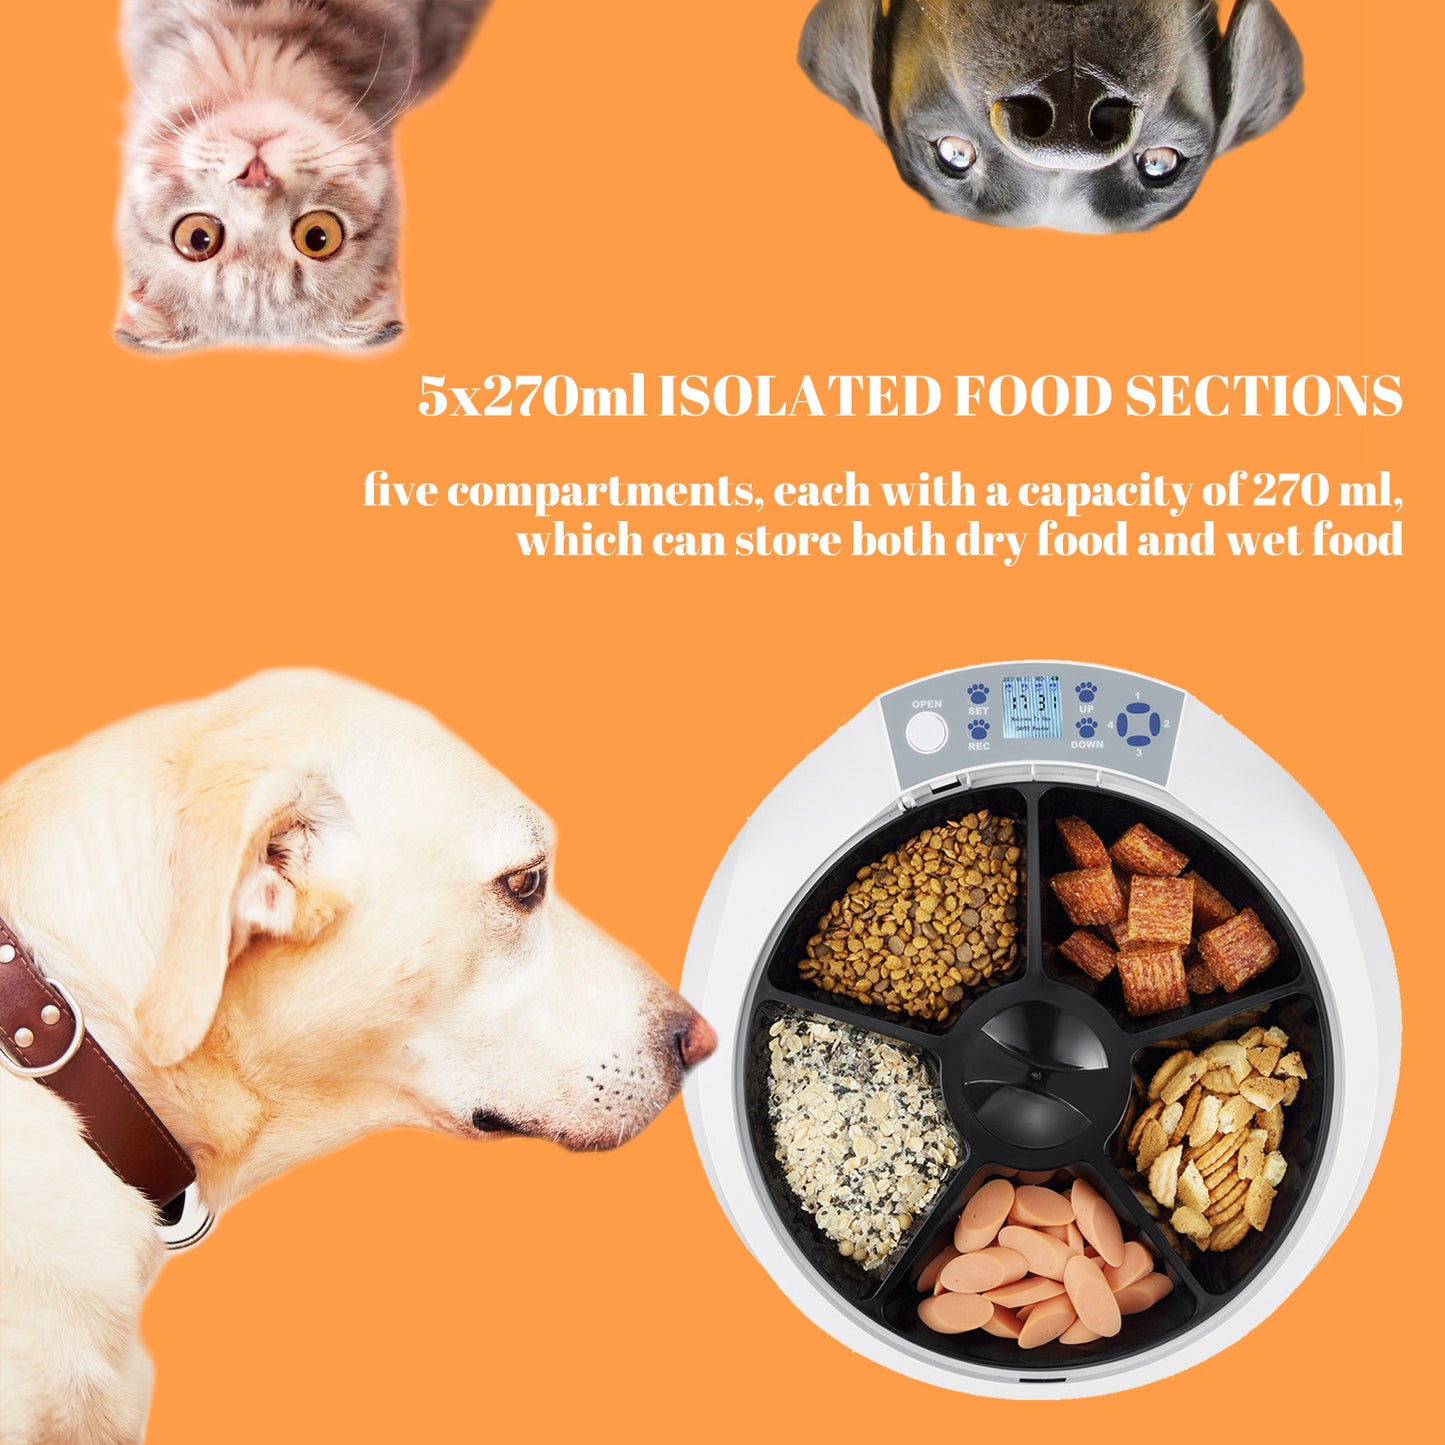 5-Meals Automatic Feeder Auto Pet Feeder 5x270ml Dry and Wet Food Dispenser Cat and Dog Food Dispenser Programmable Timer Portion Control with Voice Recorder Dual Power Supply